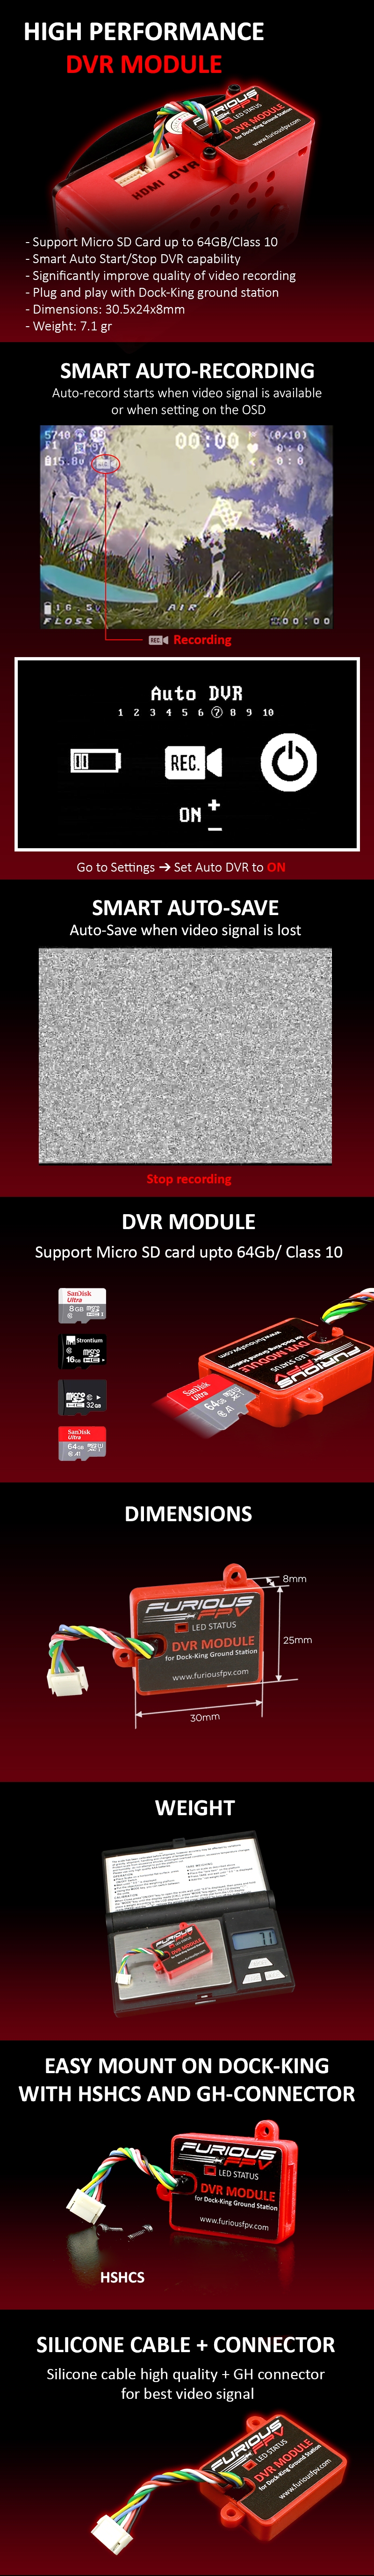 FuriousFPV High Performance DVR Module For Dock-King Ground Station Support Smart Auto Recording